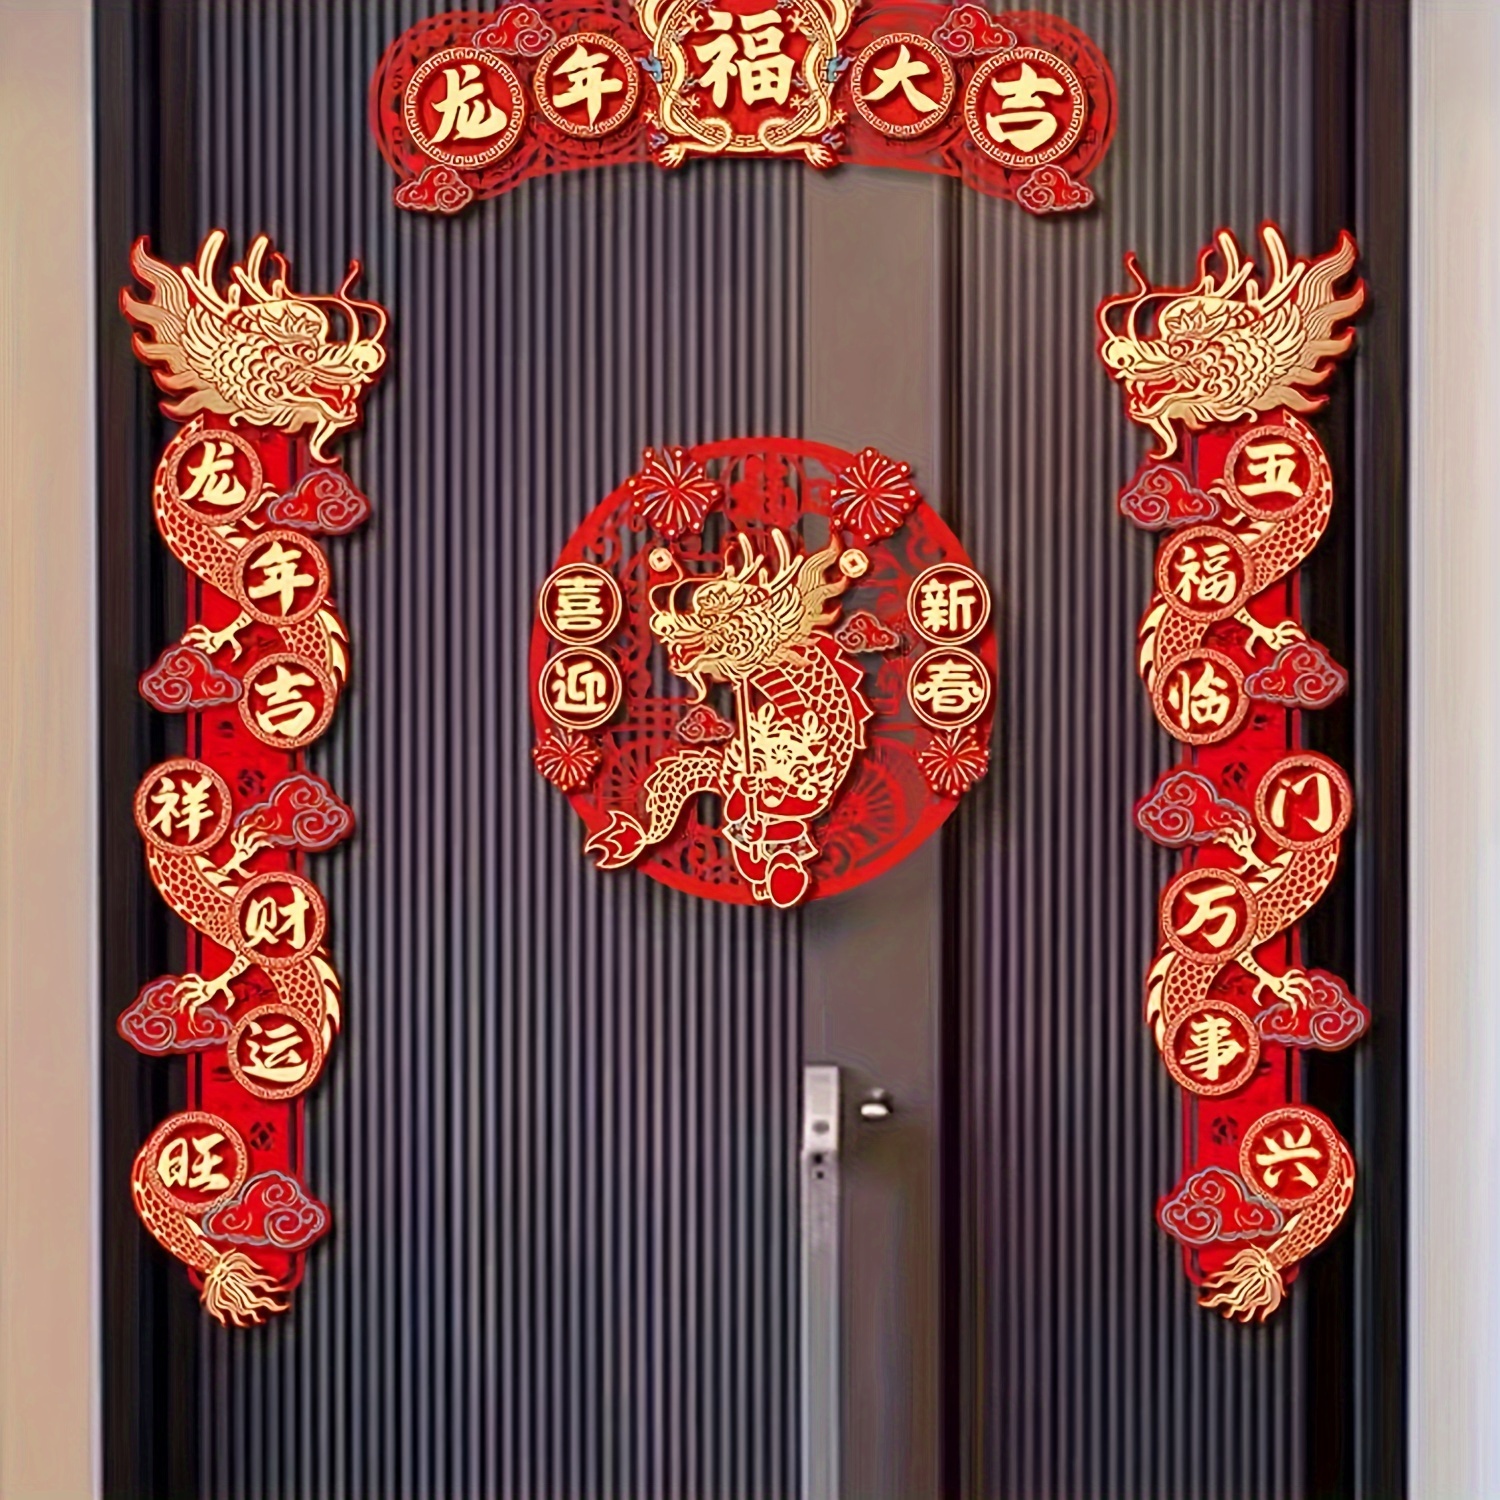 Chinese new year banner with spring festival decor